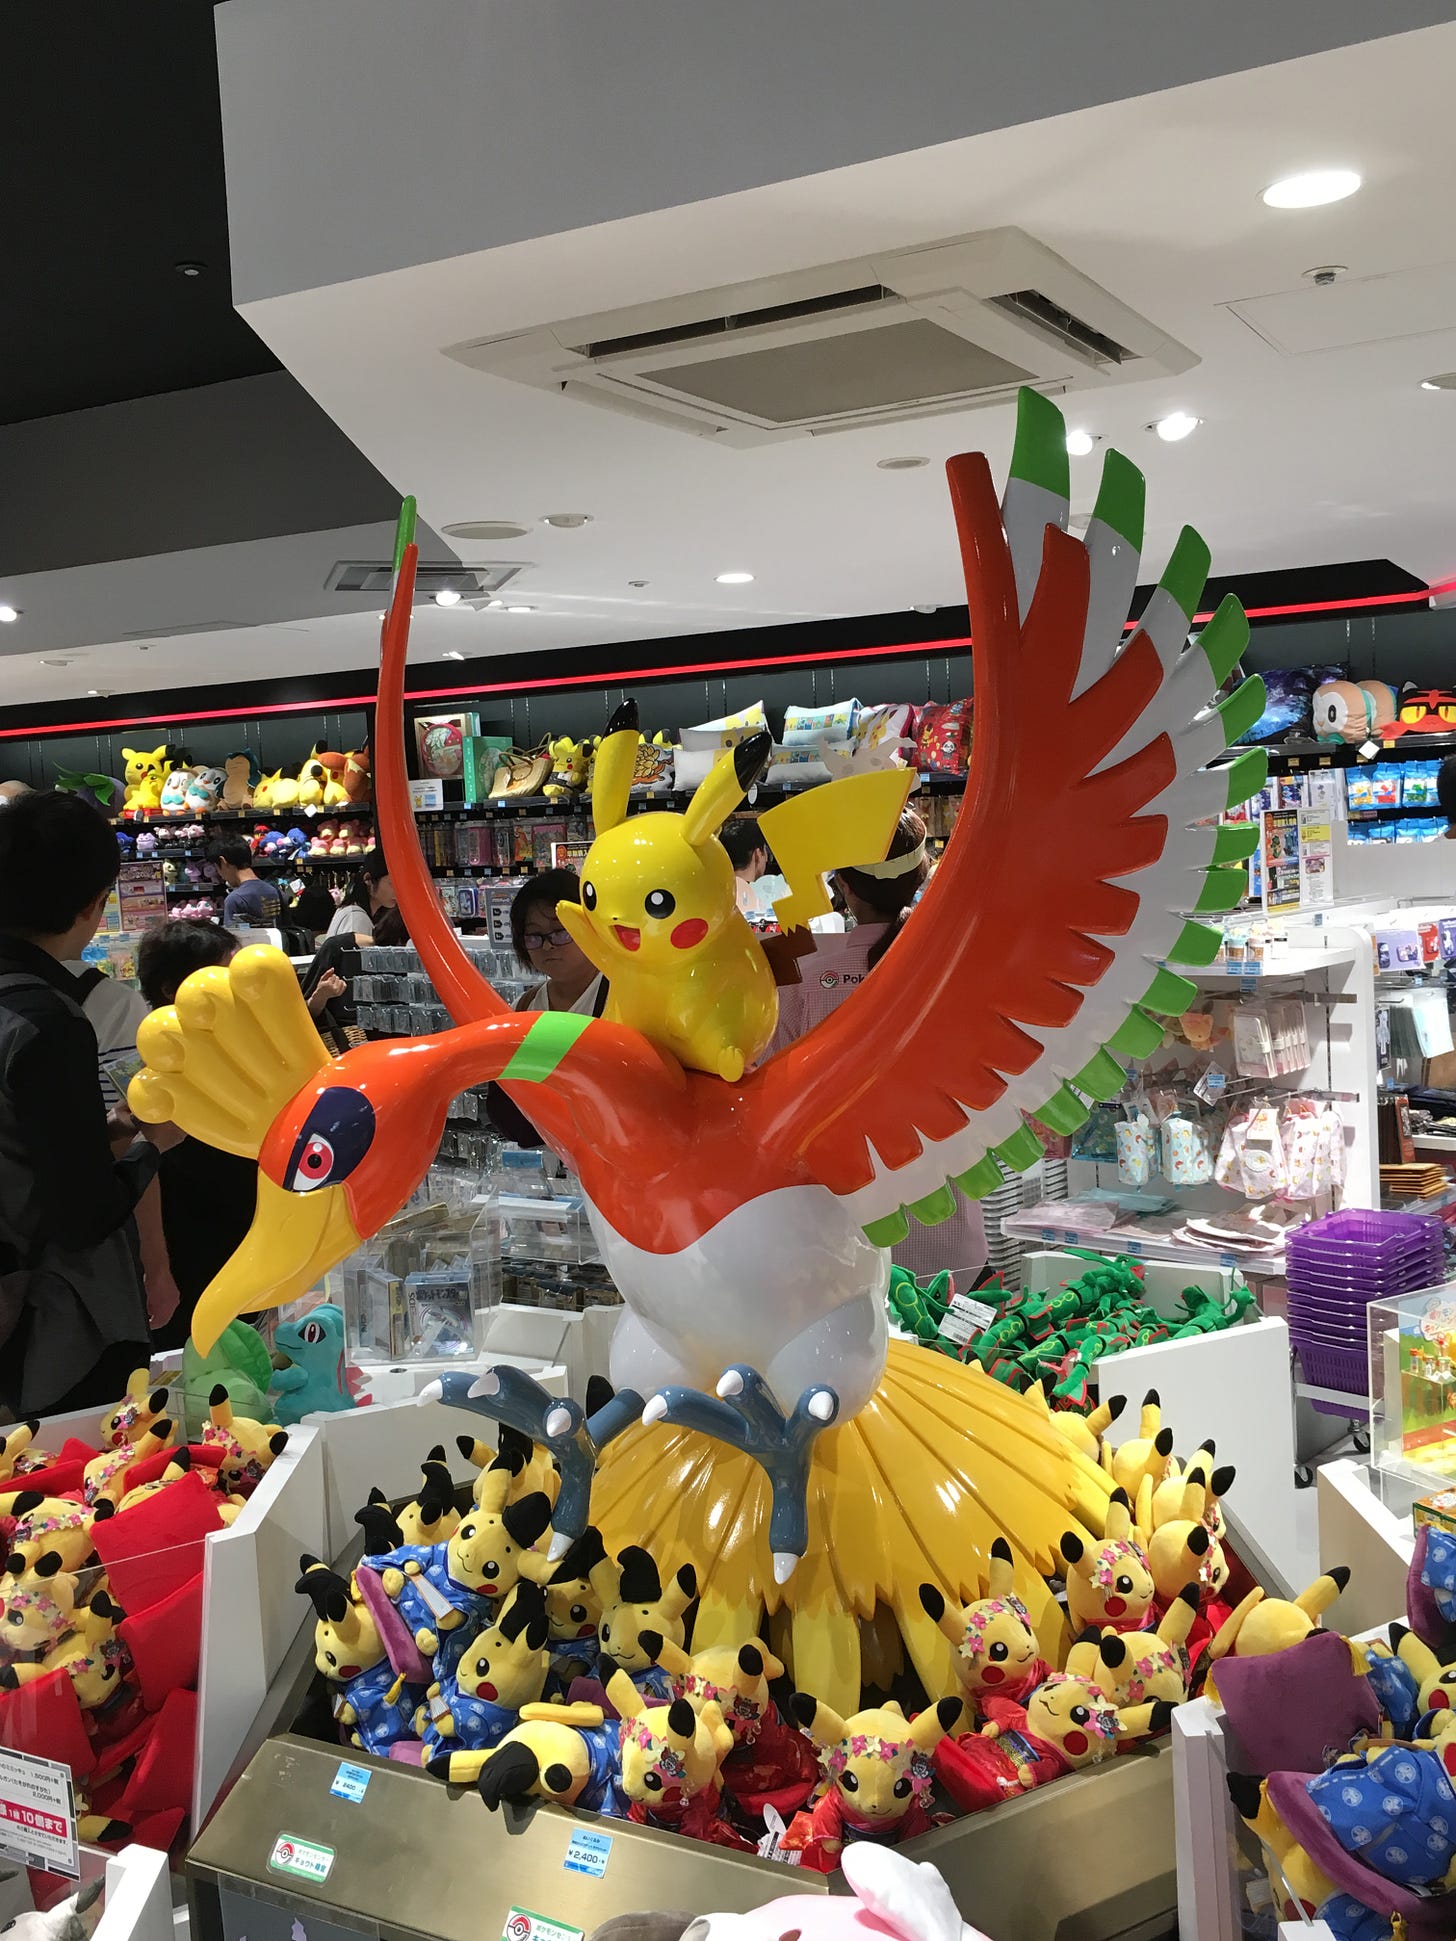 Pokémon statues can be found in different Pokémon Centers across Japan. This Pikachu riding Ho-Oh used to be found at the Kyoto store, before it was closed down and relocated to the Kyoto Econony Center